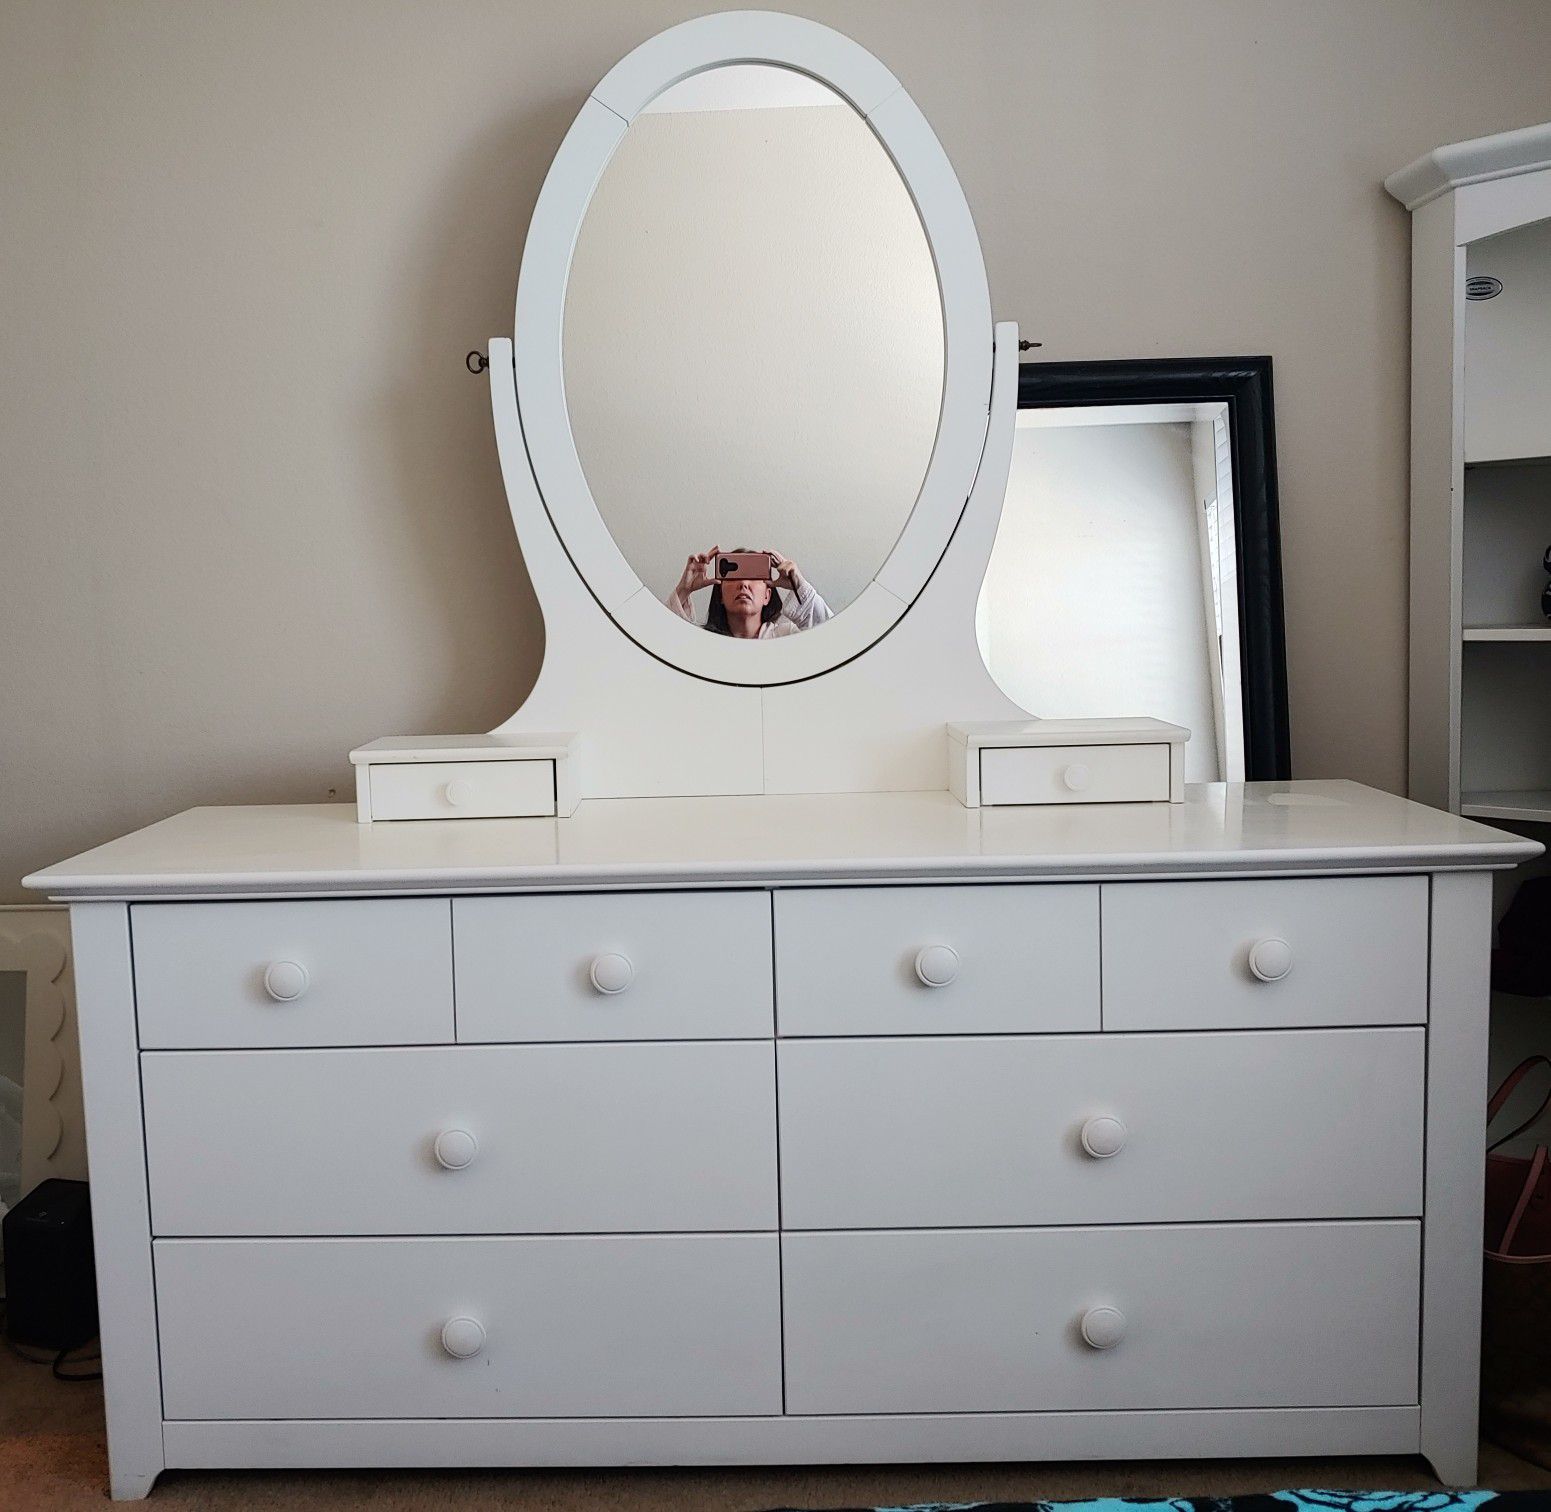 6 drawer dresser with detachable mirror. Solid wood. 65" × 21.5